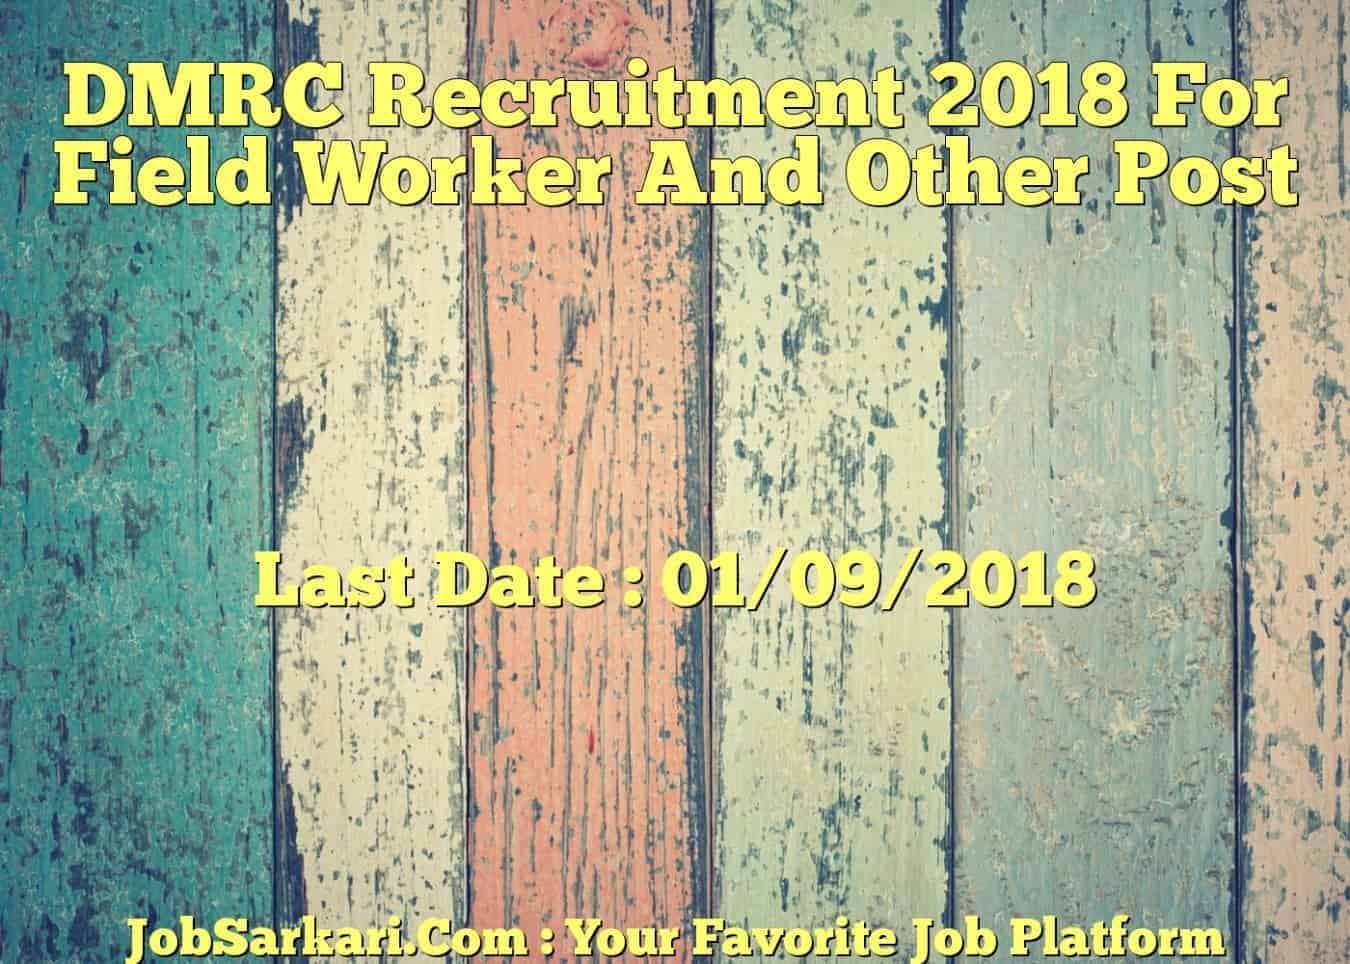 DMRC Recruitment 2018 For Field Worker And Other Post